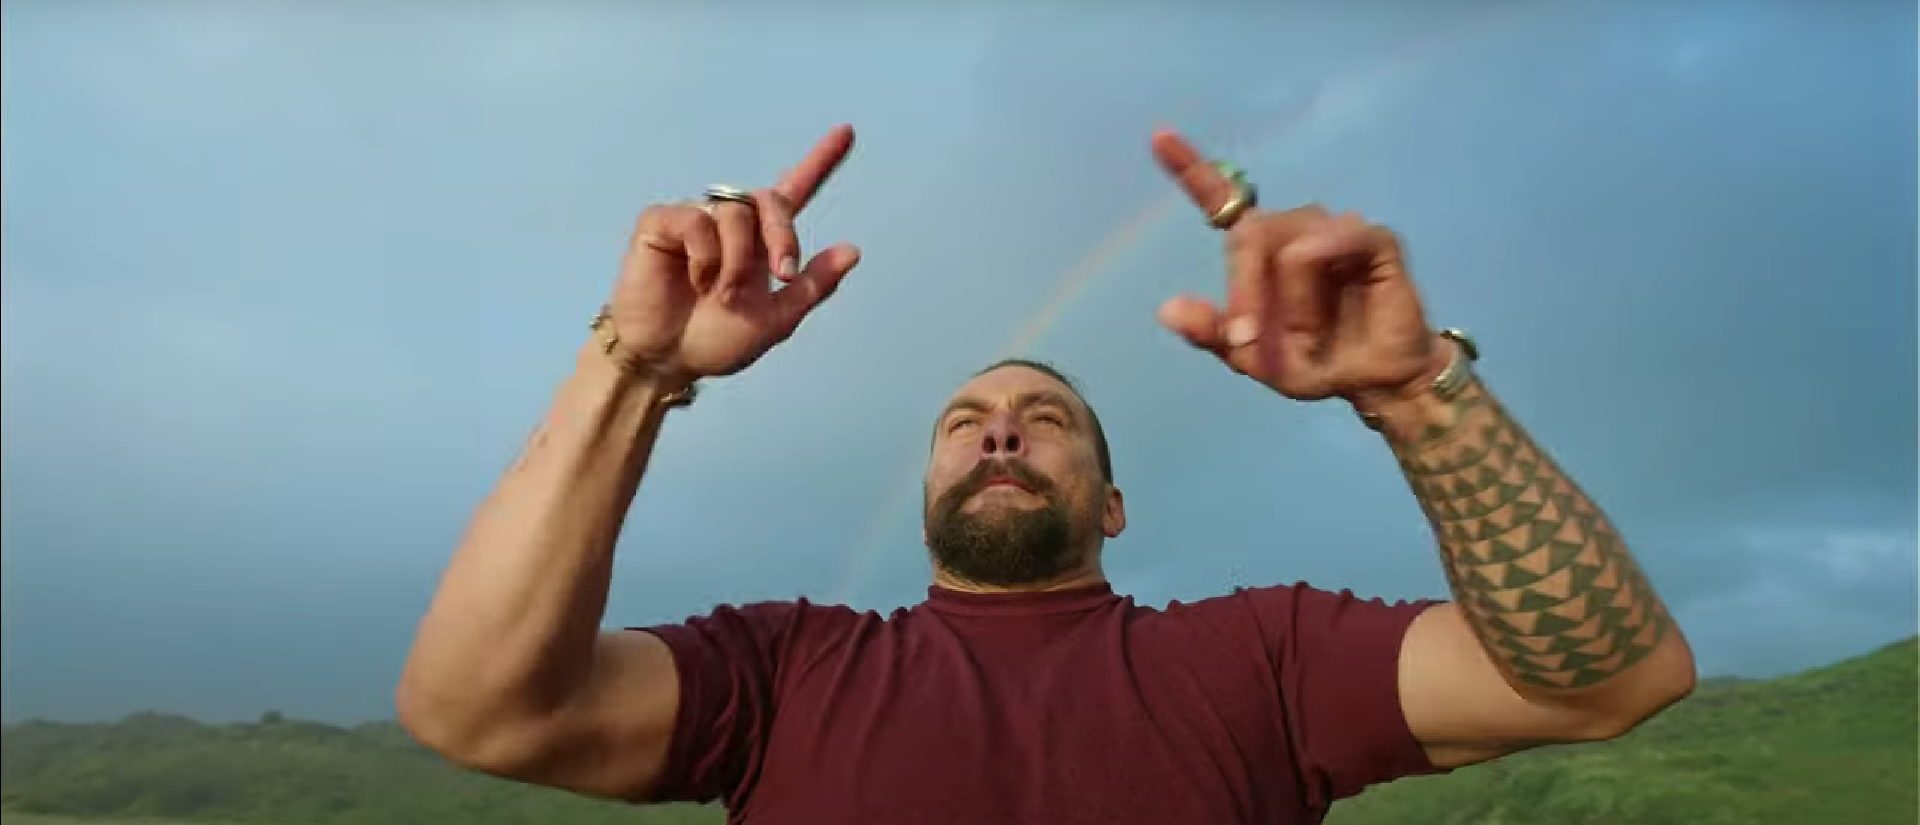 Jason Momoa Orchestrates Jumping Sharks In Video Promoting Exciting